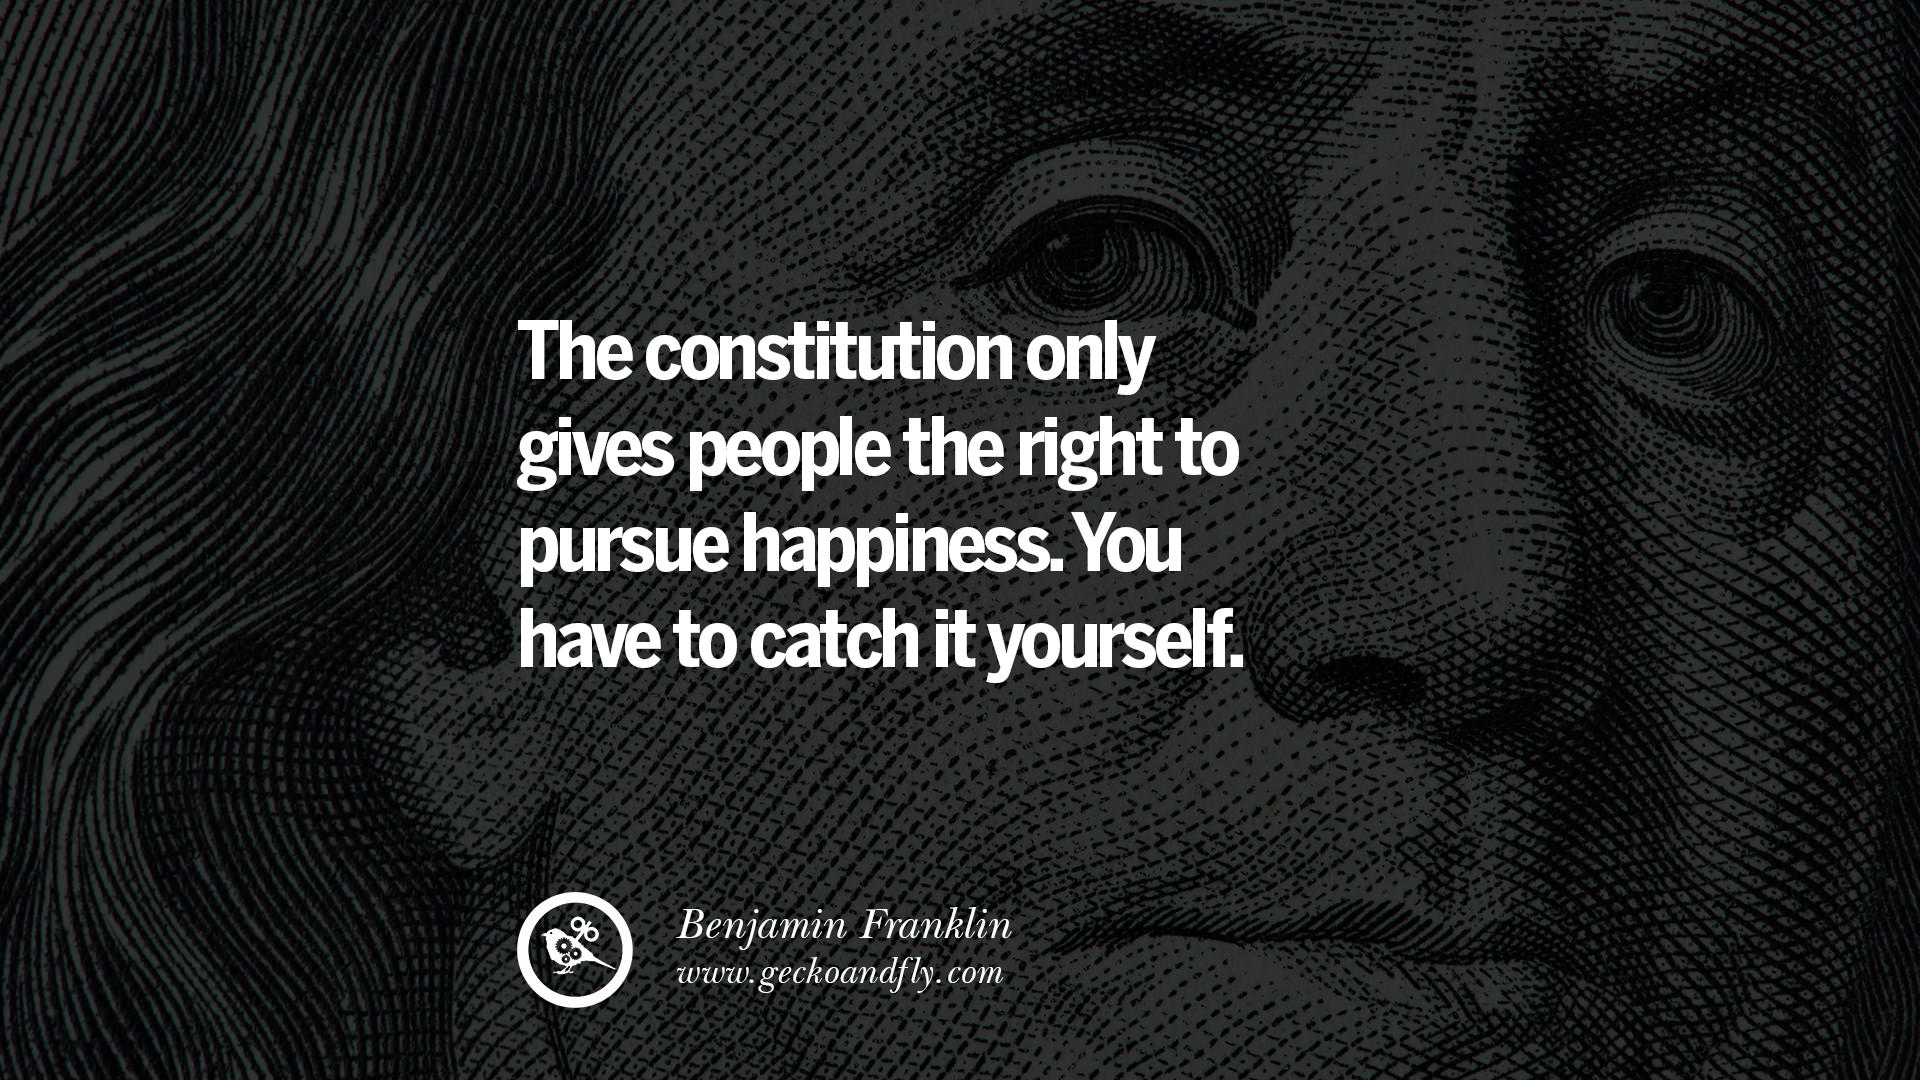 40 Famous Benjamin Franklin Quotes on Knowledge, Opportunities, and Liberty